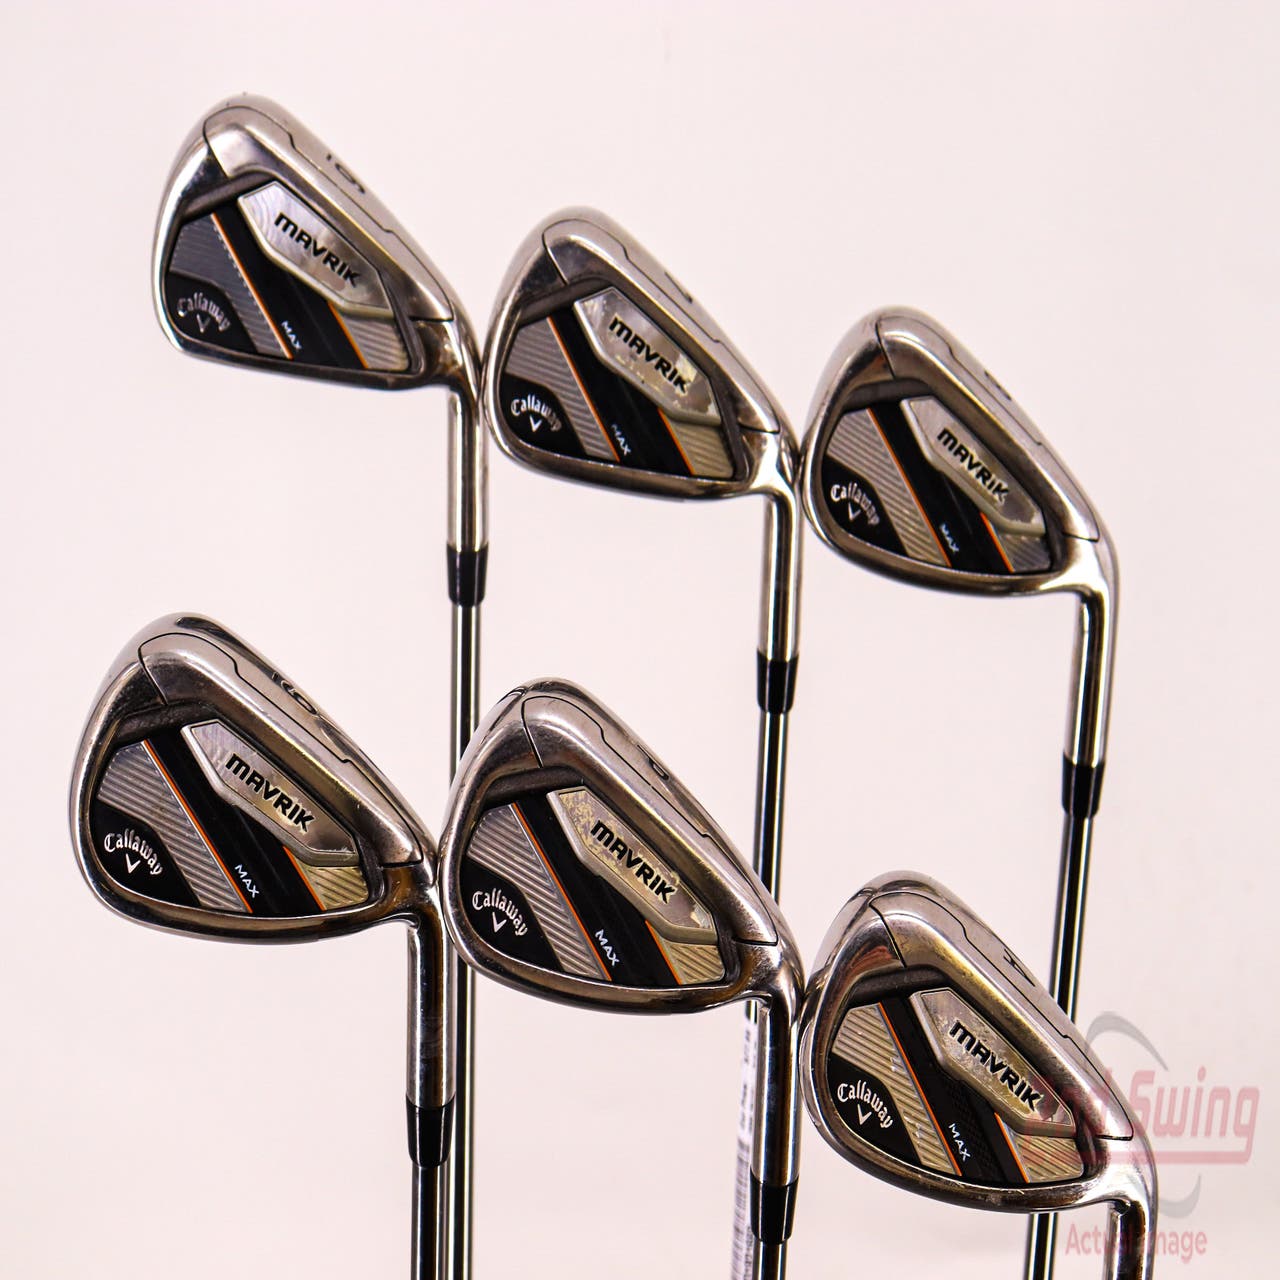 Used Golf Clubs, Pre-Owned Drivers, Irons, Putters, Wedges